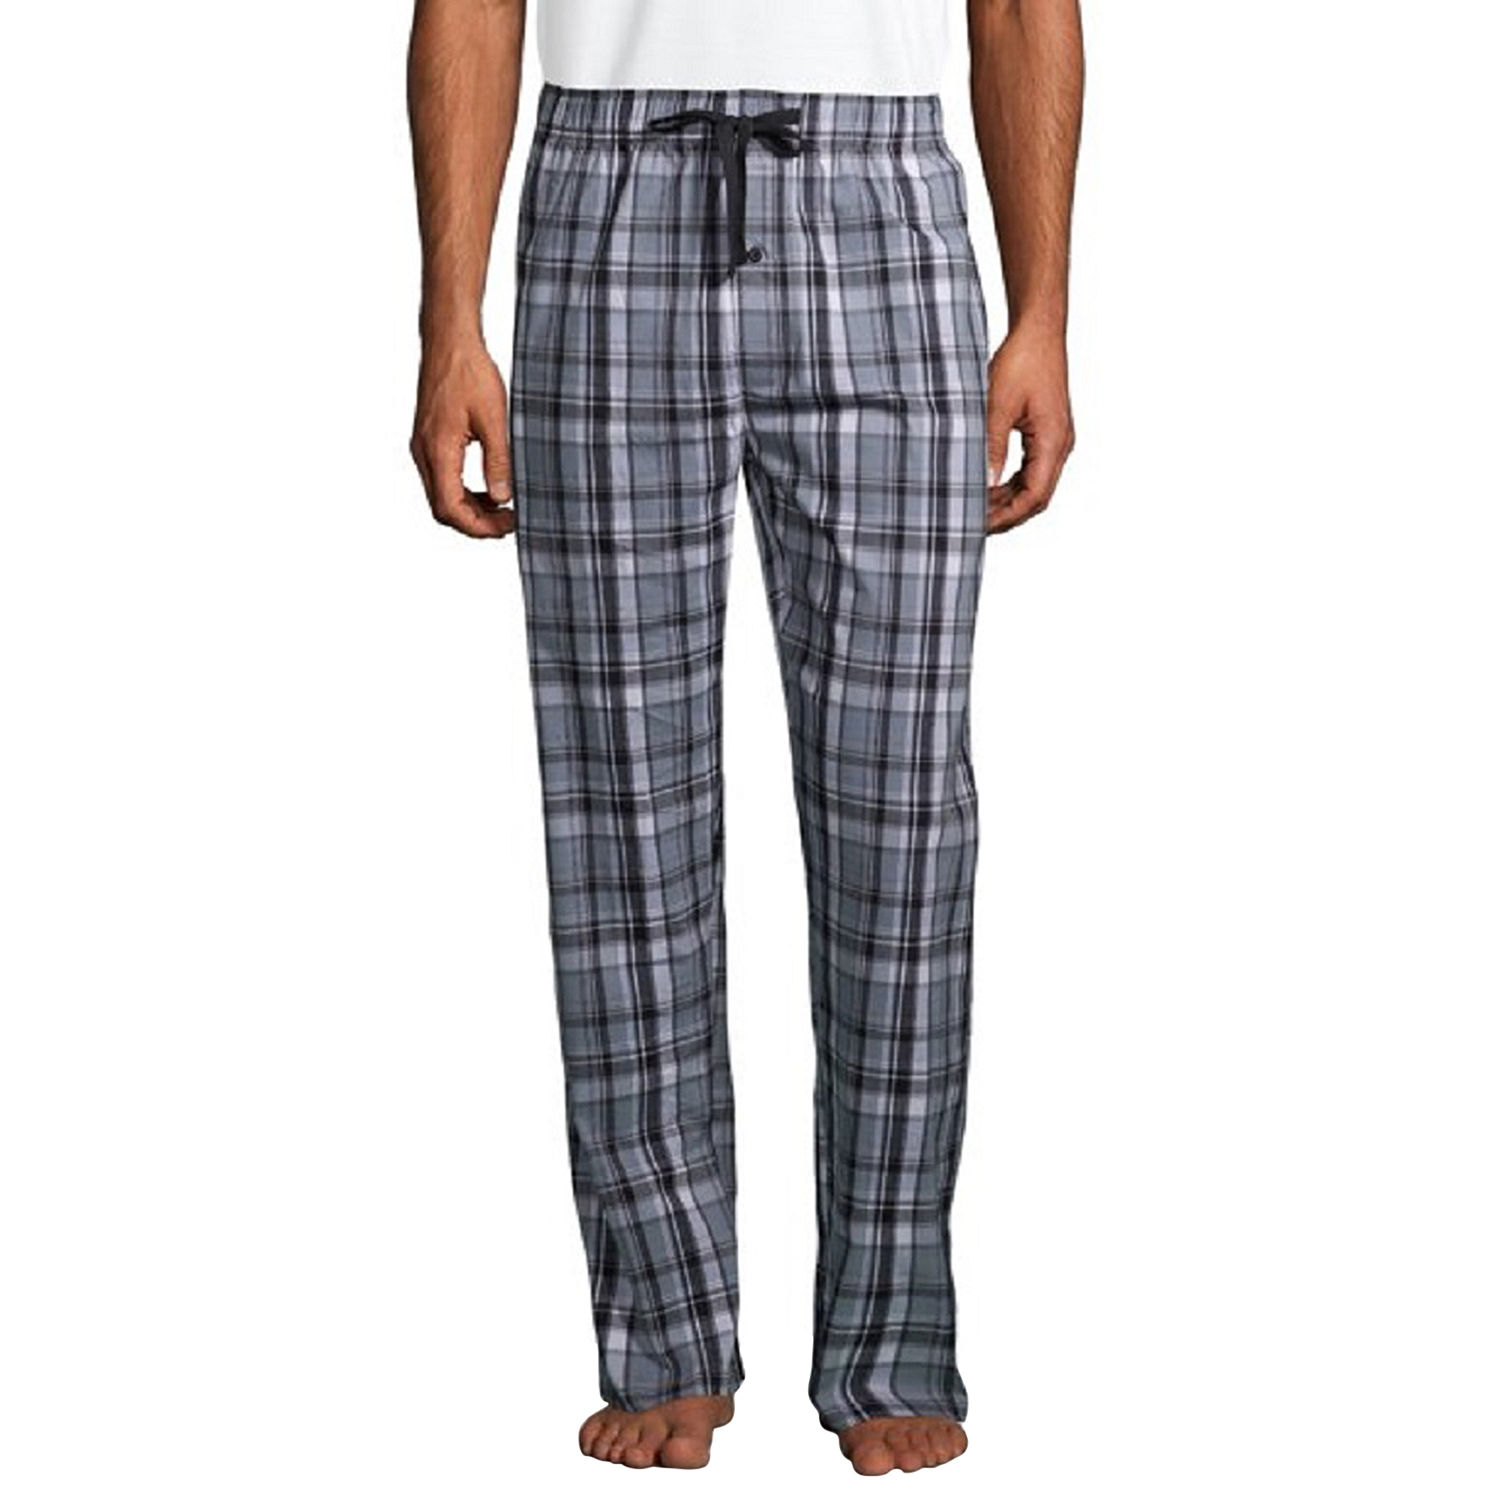 Hanes Mens Pajama Pants, Color: Gray Black - JCPenney